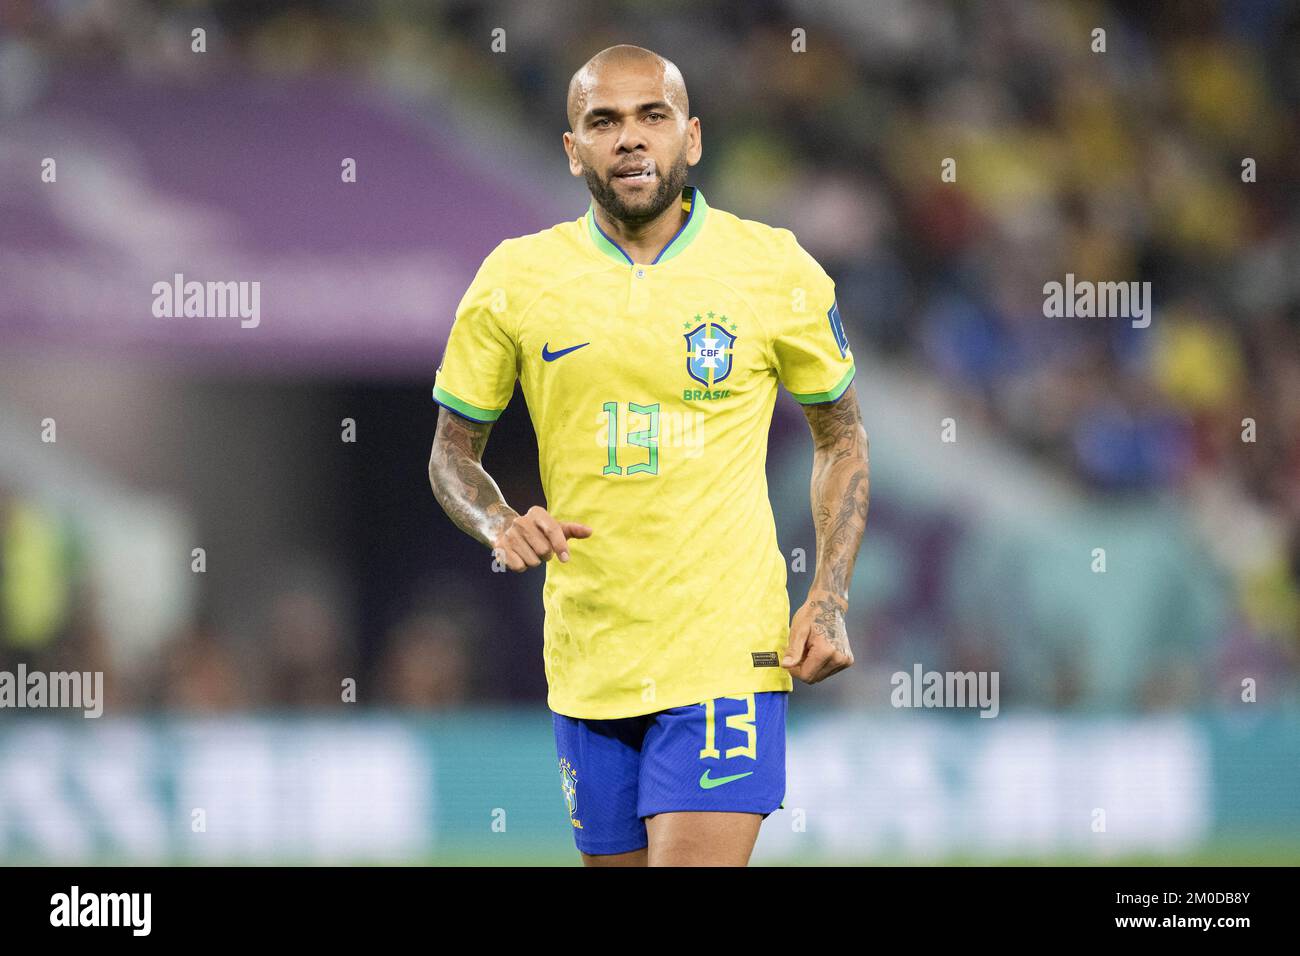 Doha, Qatar. December 05, 2022, Dani Alves of Brazil in action during the FIFA World Cup Qatar 2022 Round of 16 match between Brazil v Korea Republic at Stadium 974, on December 05, 2022 in Doha, Qatar. Photo by David Niviere/ABACAPRESS.COM Stock Photo